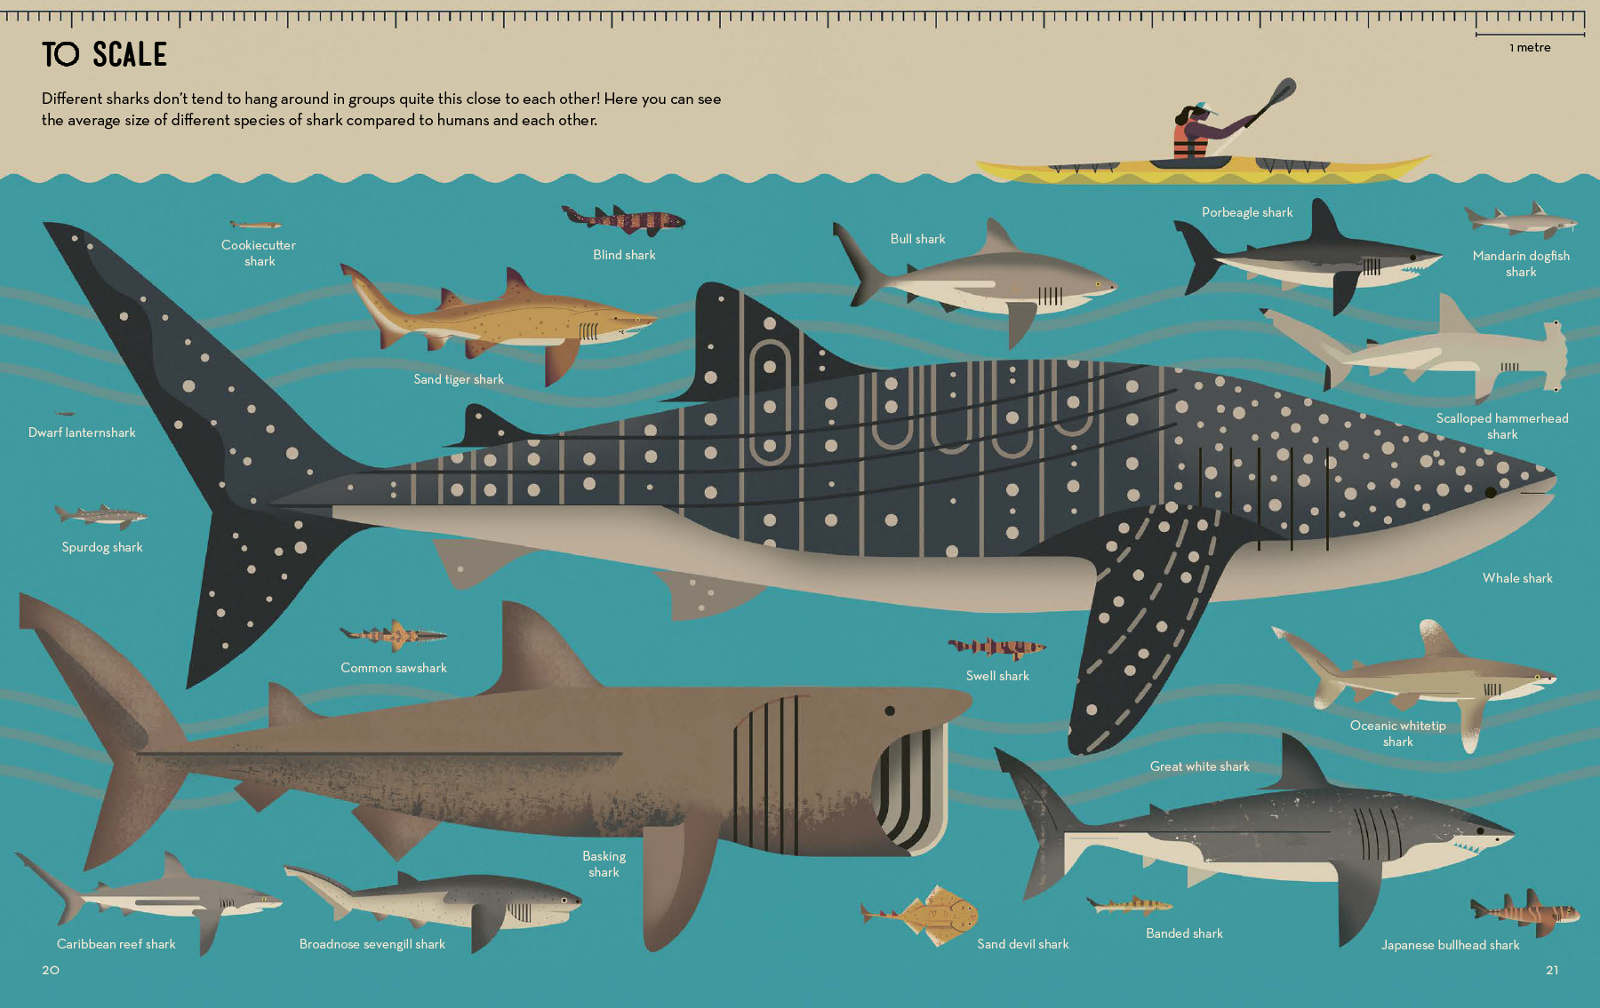 11-Smart-About-Sharks-Owen-Davey-Whale-Kayak-Scale_1600_c